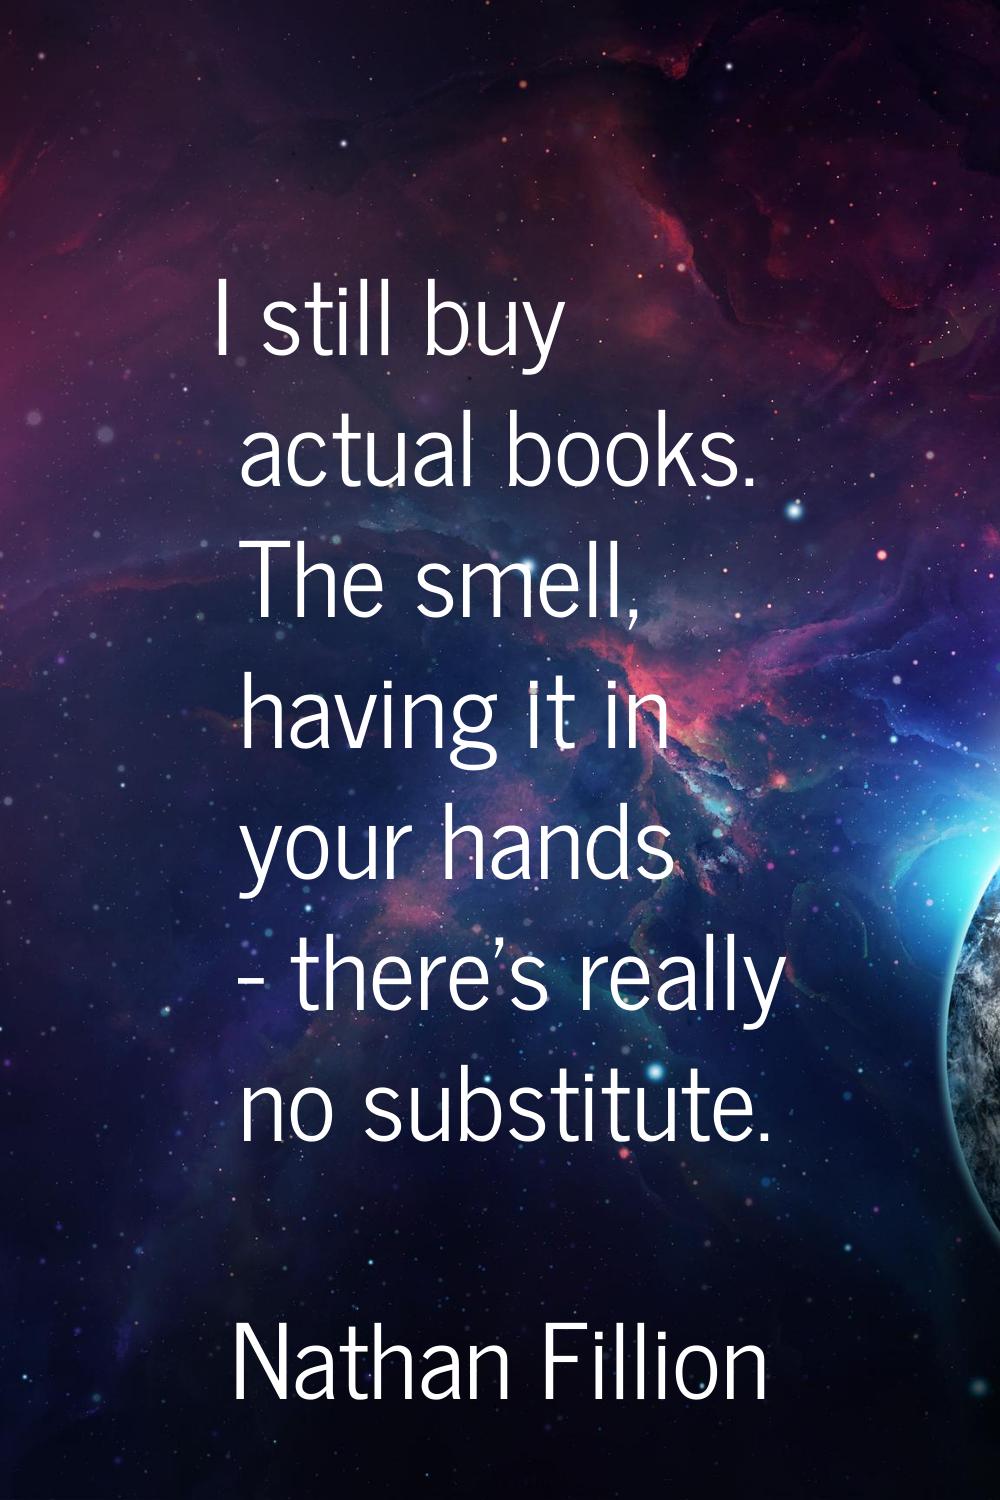 I still buy actual books. The smell, having it in your hands - there's really no substitute.